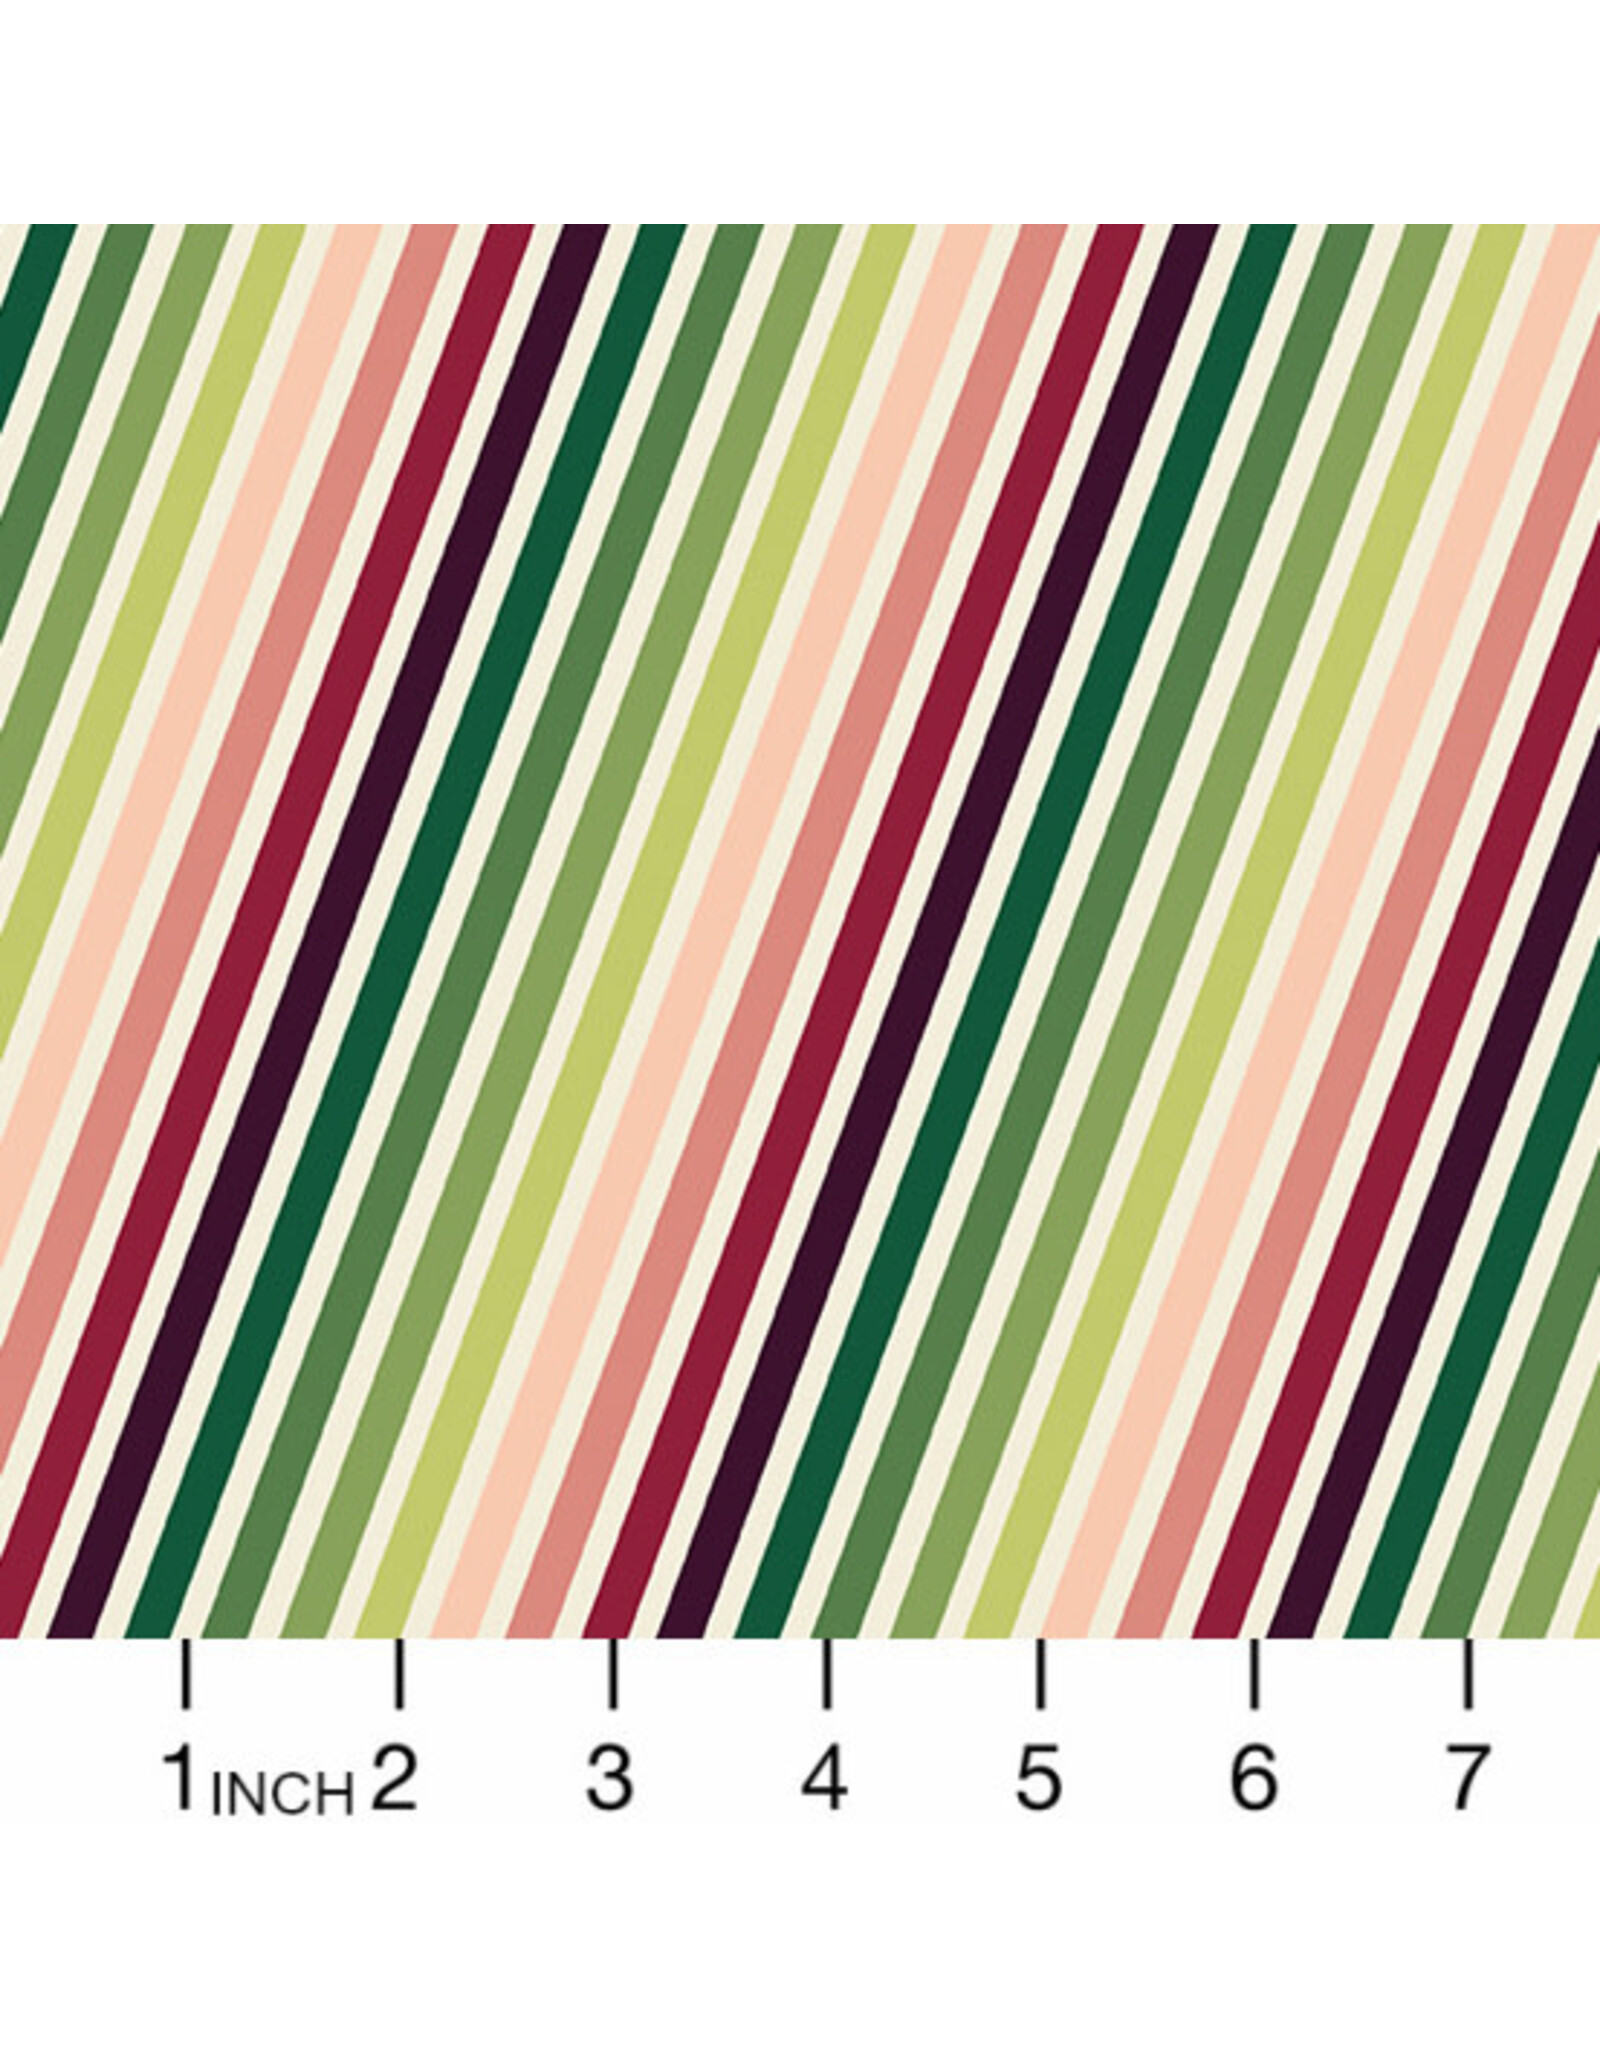 PD's Giucy Giuce Collection Natale, Stripe in Classica, Dinner Napkin